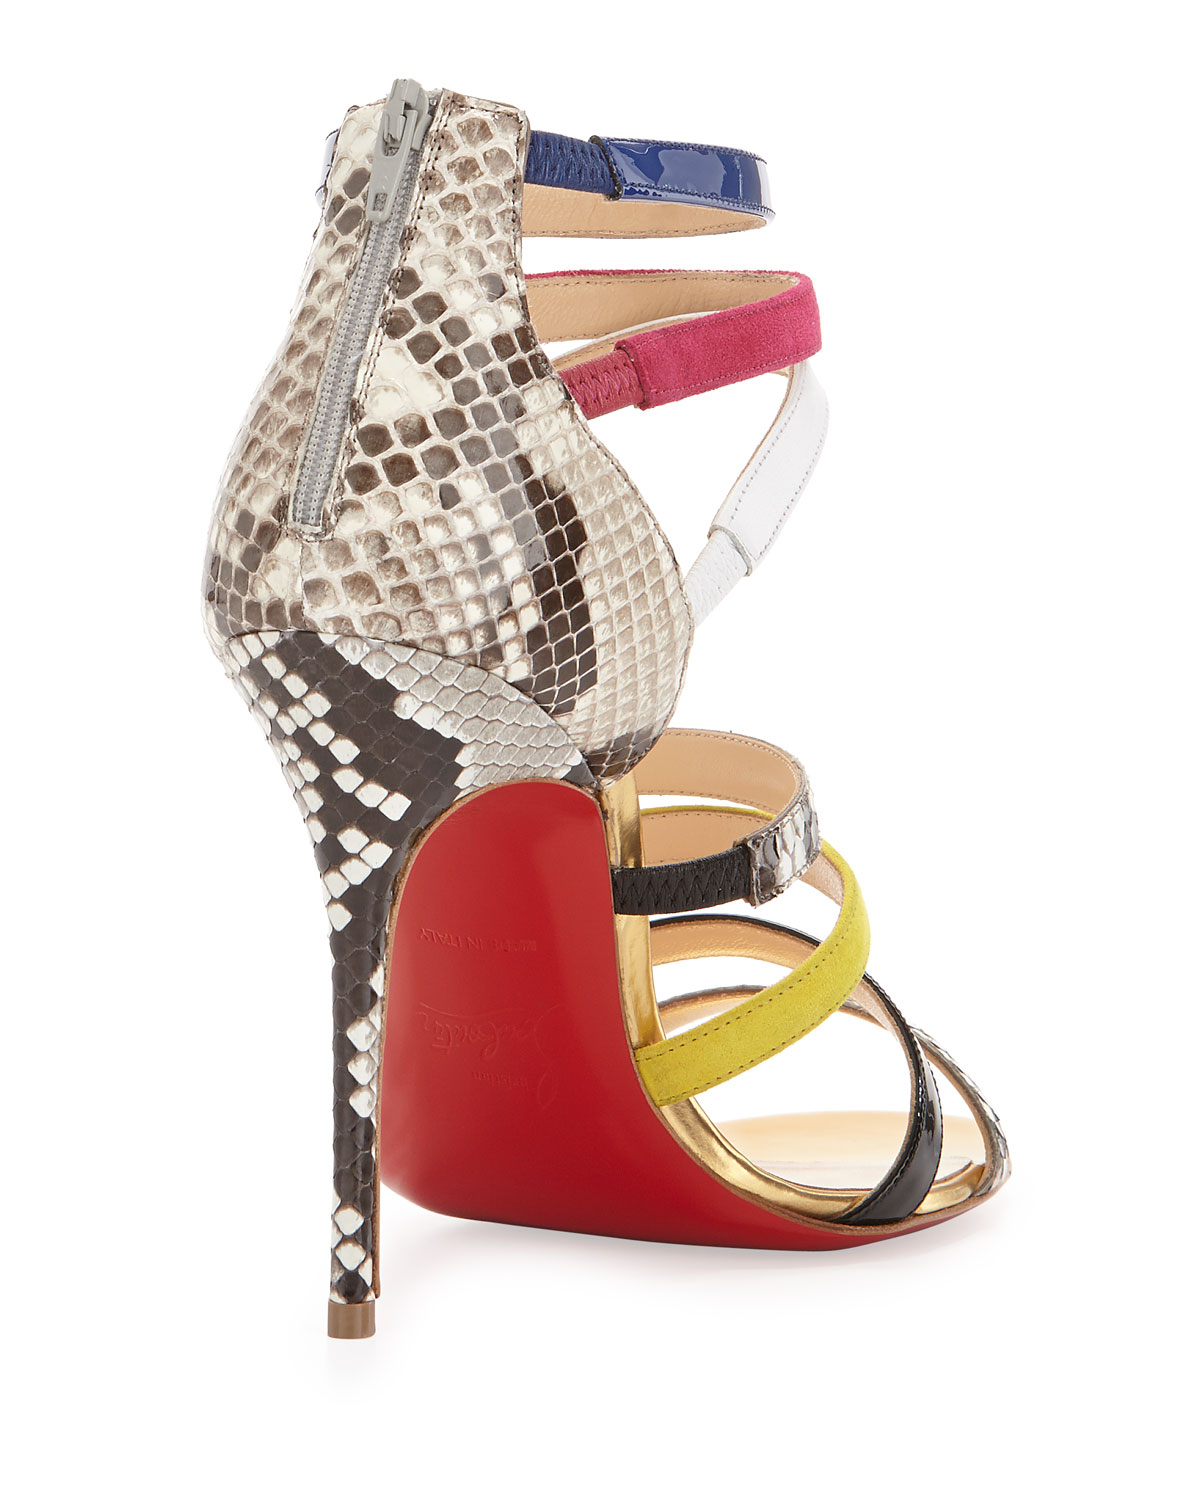 christian louboutin cage bootie | Tasting asia